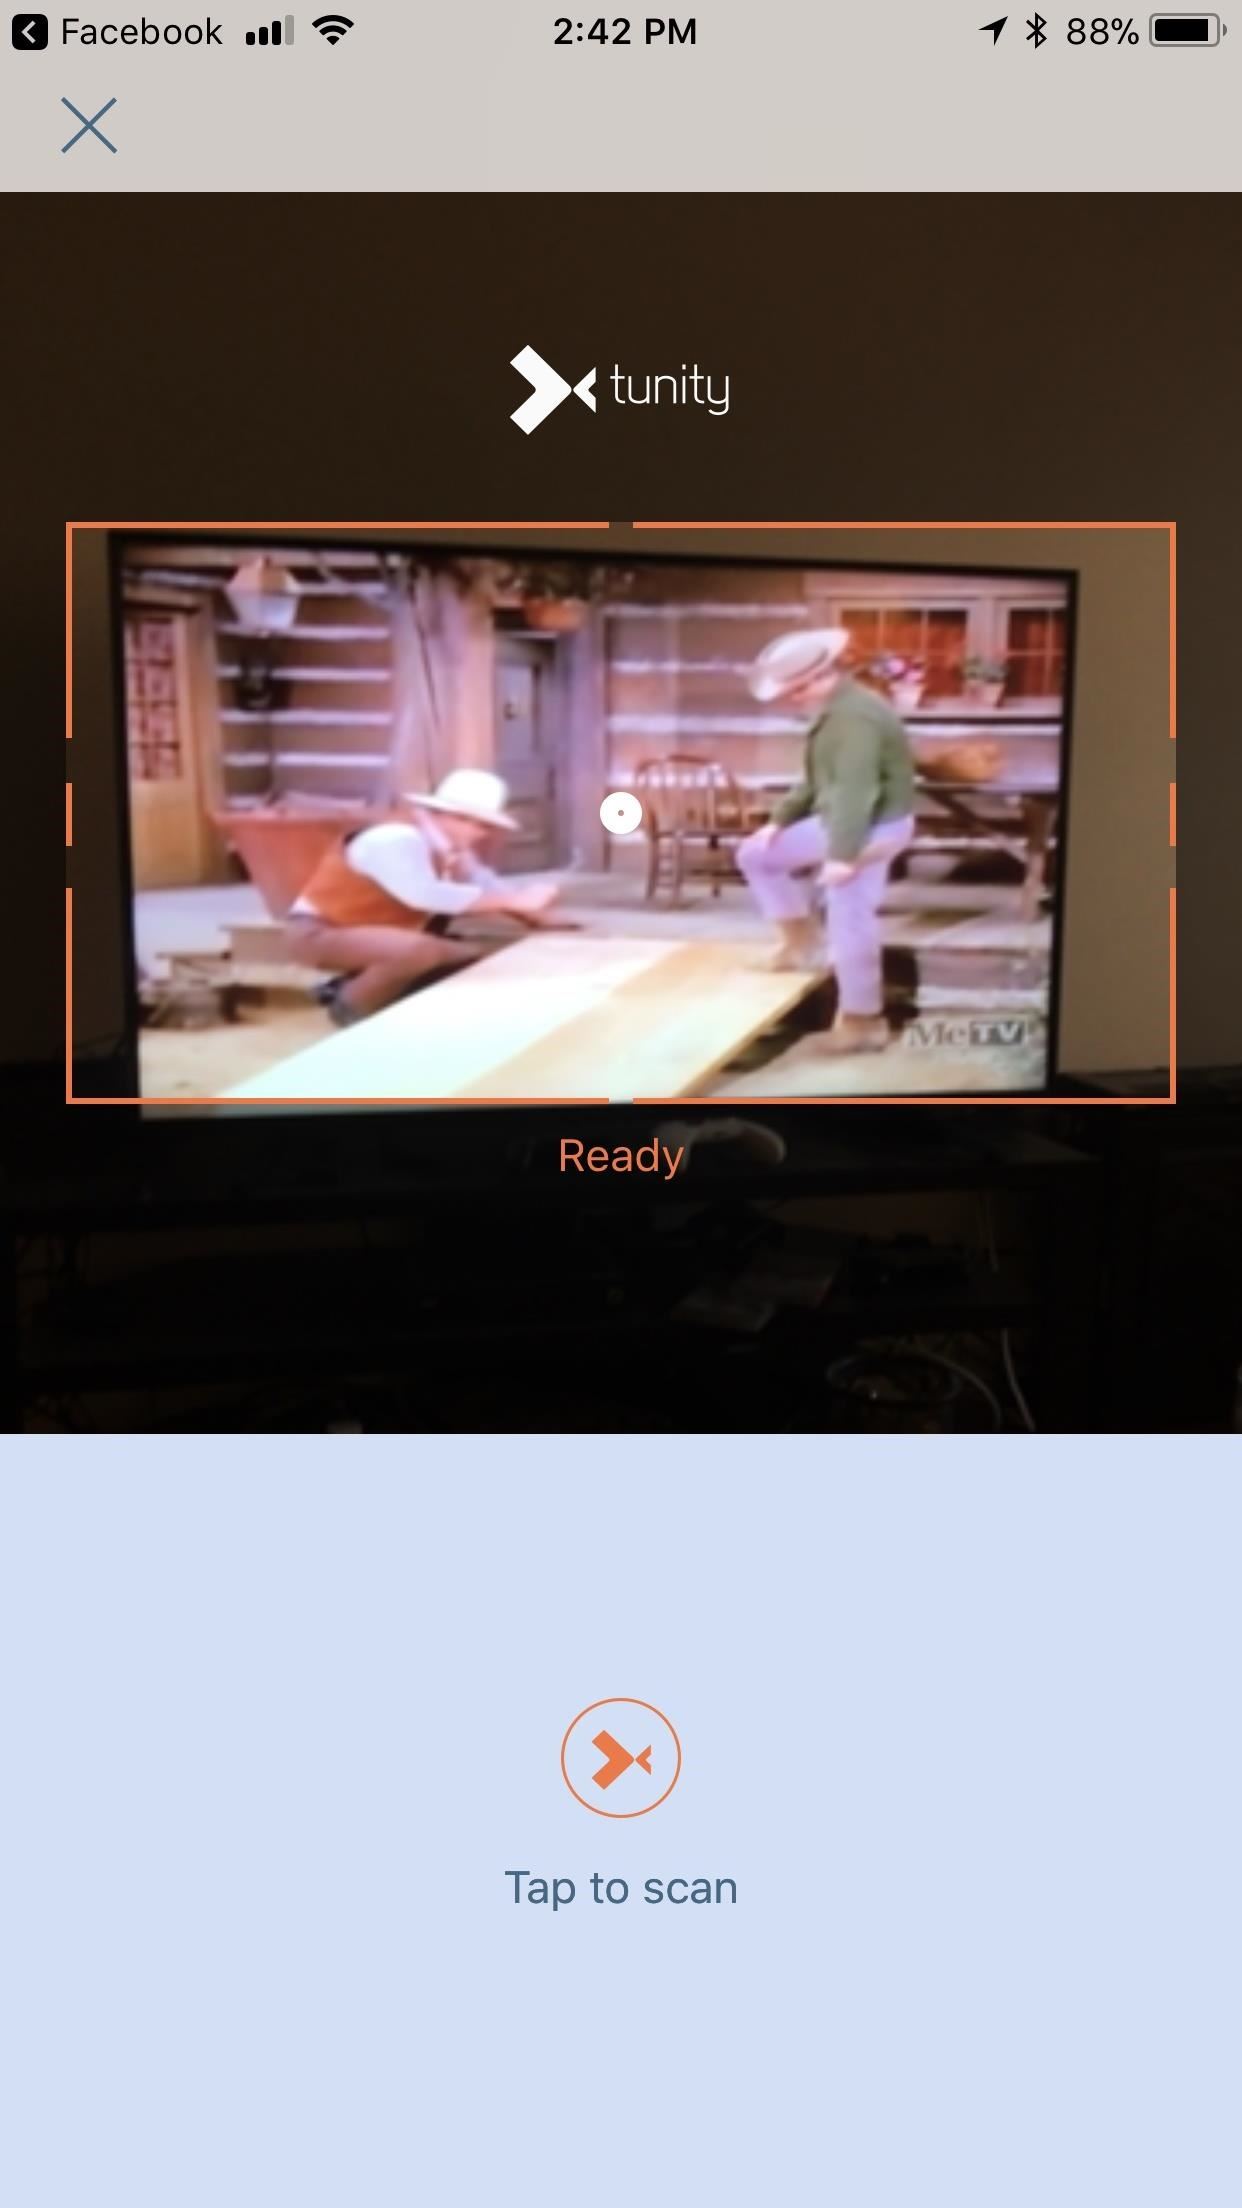 This App Makes It Easy to Actually Hear the TV at a Loud Bar